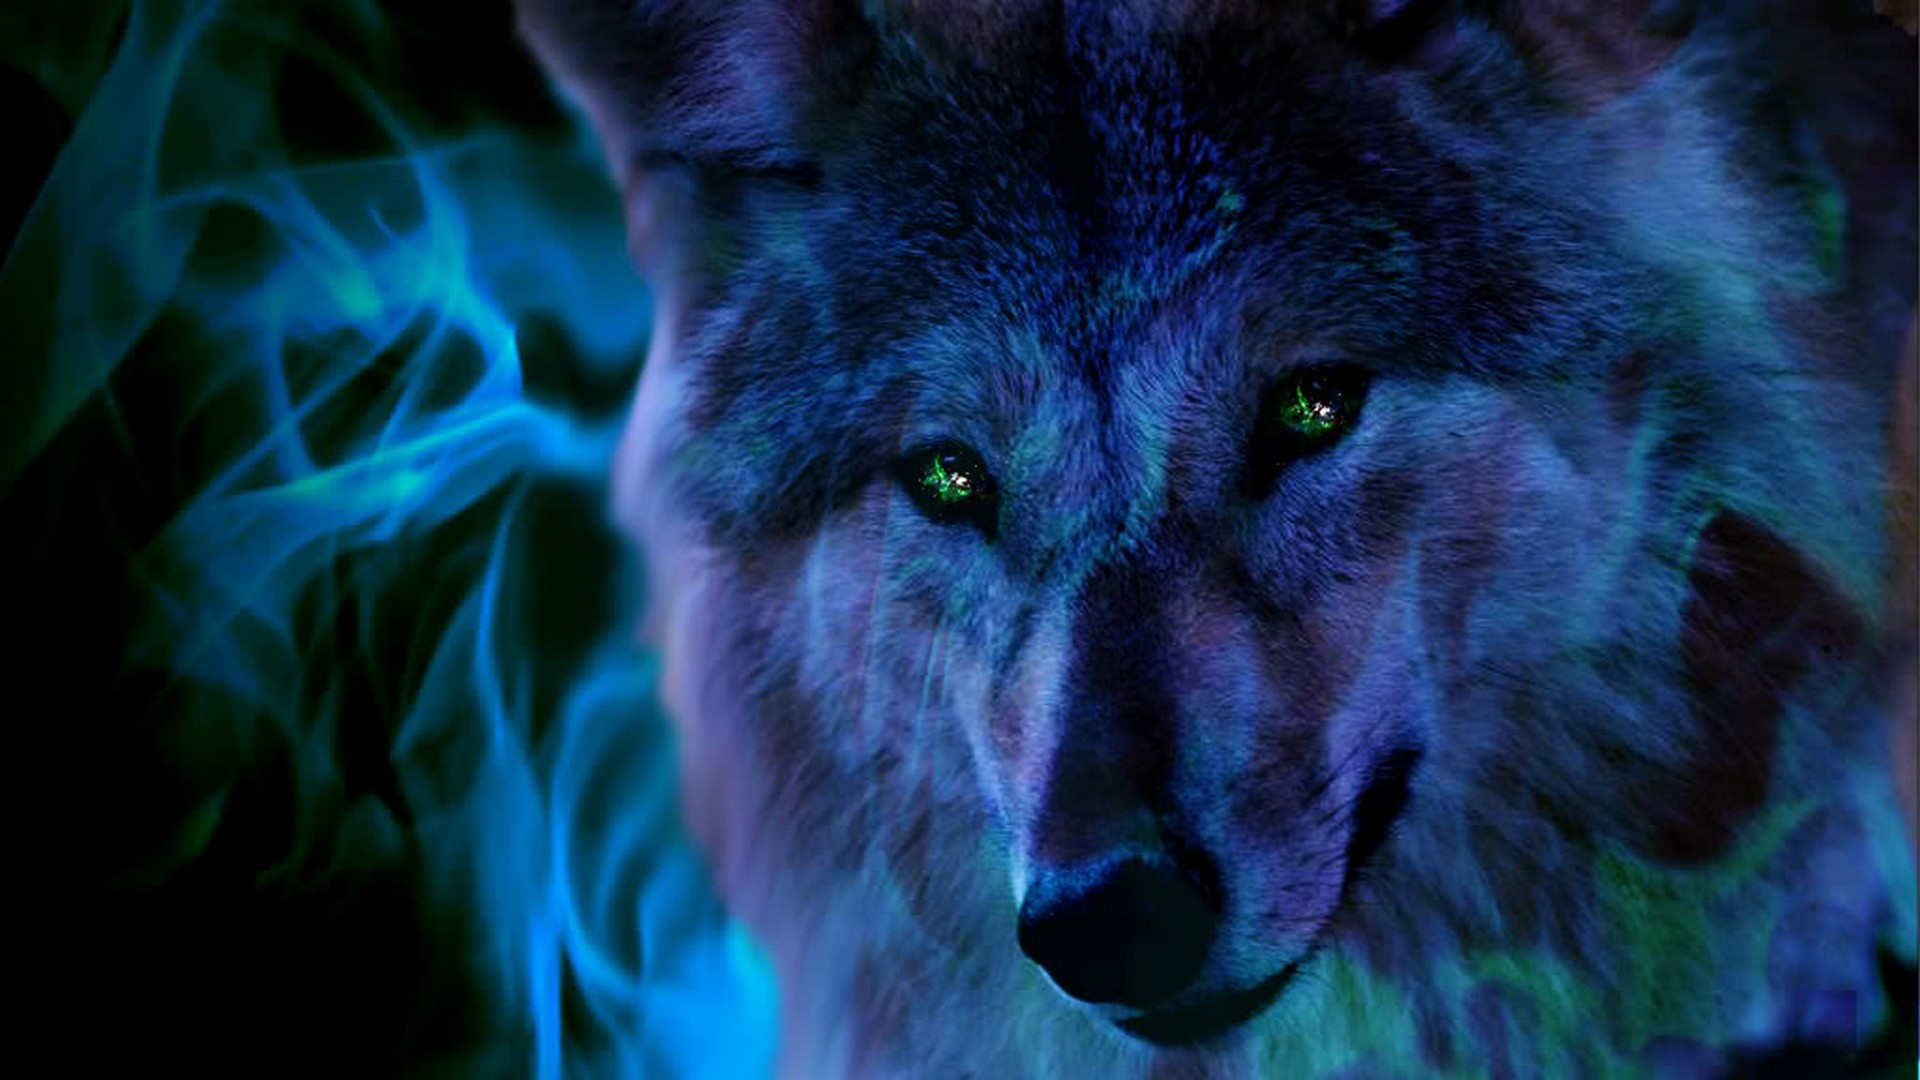 Cool Wolf Background Wallpaper HD with high-resolution 1920x1080 pixel. You can use this wallpaper for your Desktop Computer Backgrounds, Mac Wallpapers, Android Lock screen or iPhone Screensavers and another smartphone device